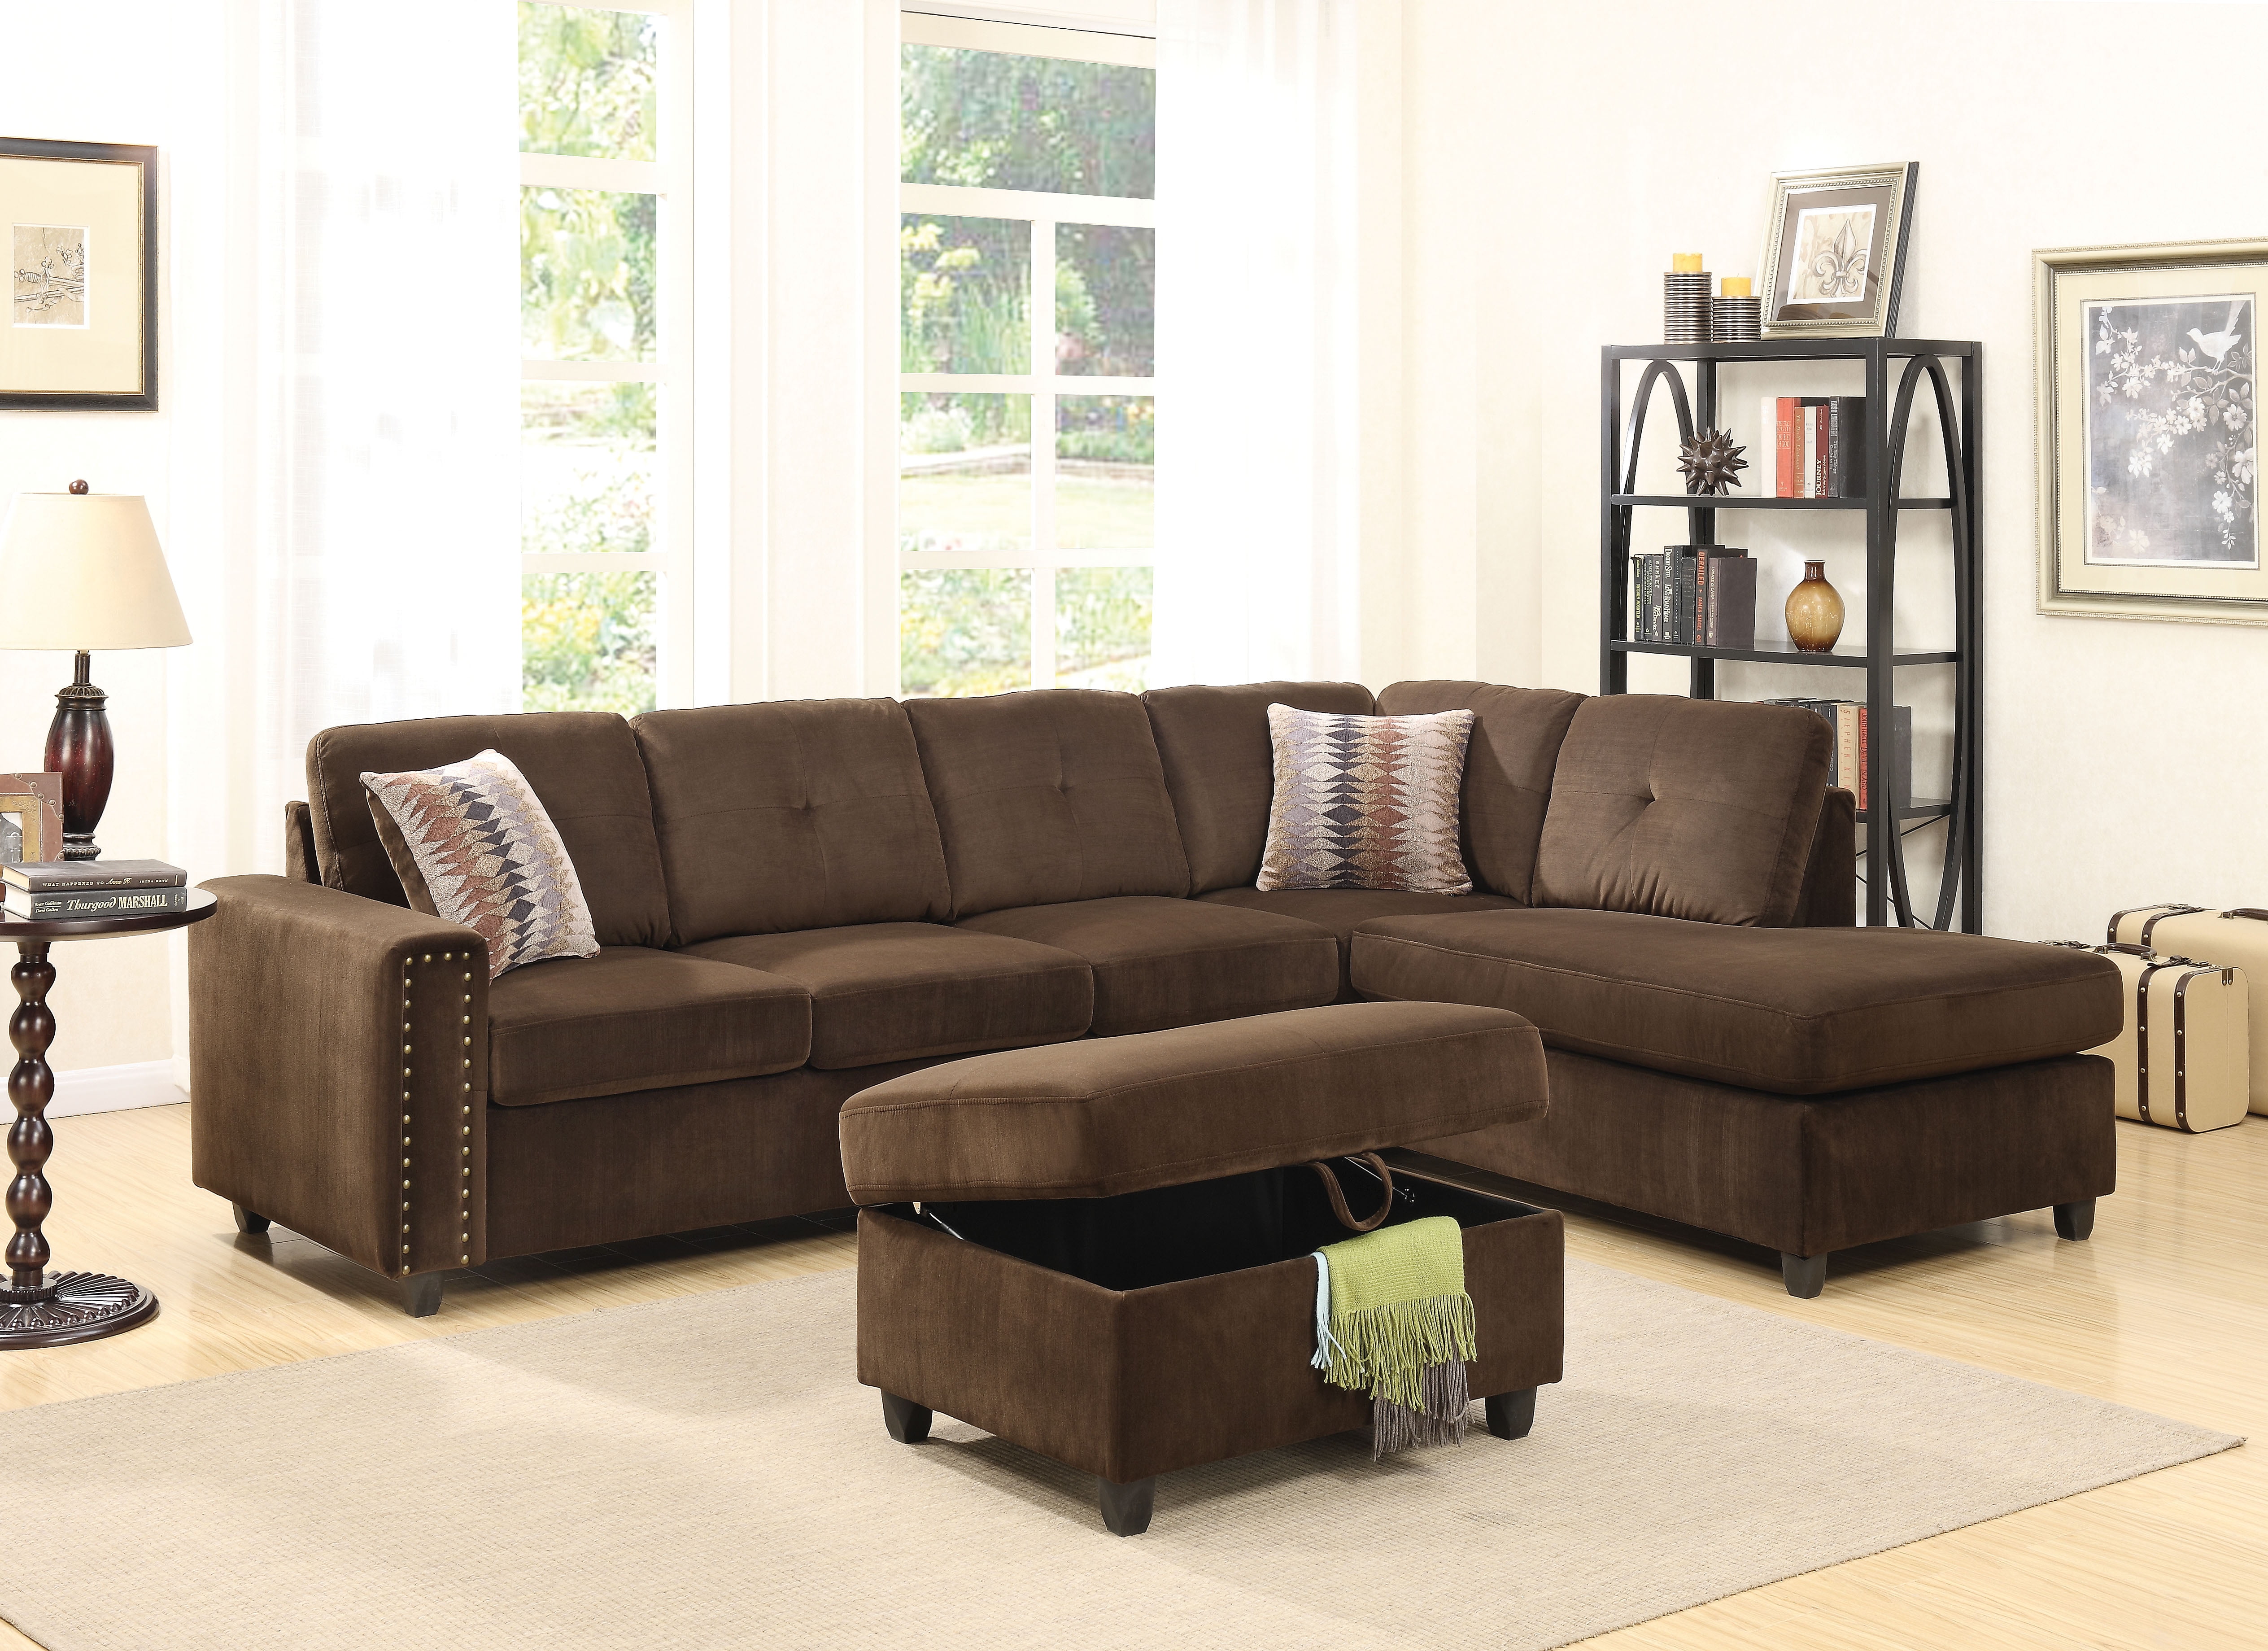 Picture of ACME 52700 2 Piece Belville Reversible Sectional Sofa with Pillows - Chocolate Velvet